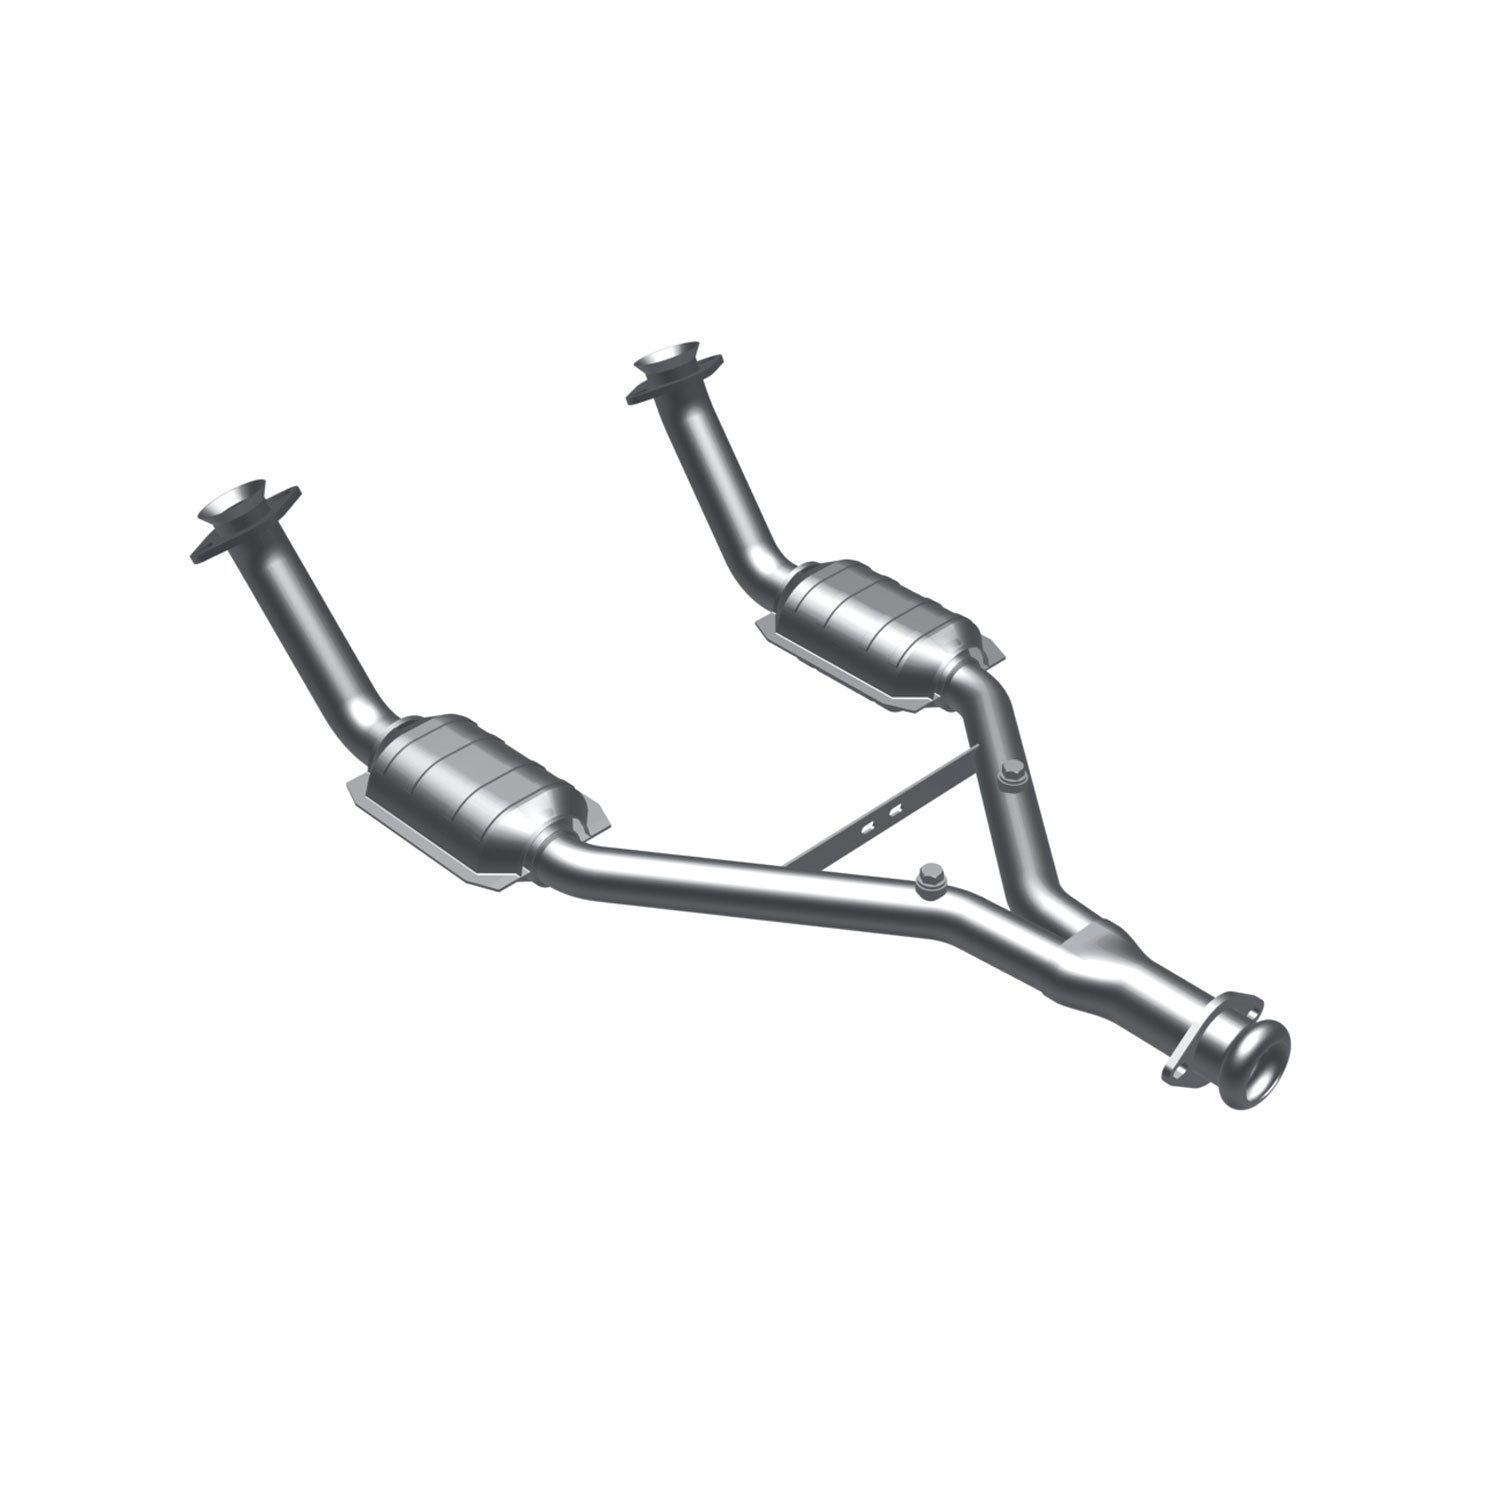 1994-1995 Ford Mustang Standard Grade Federal / EPA Compliant Direct-Fit Catalytic Converter